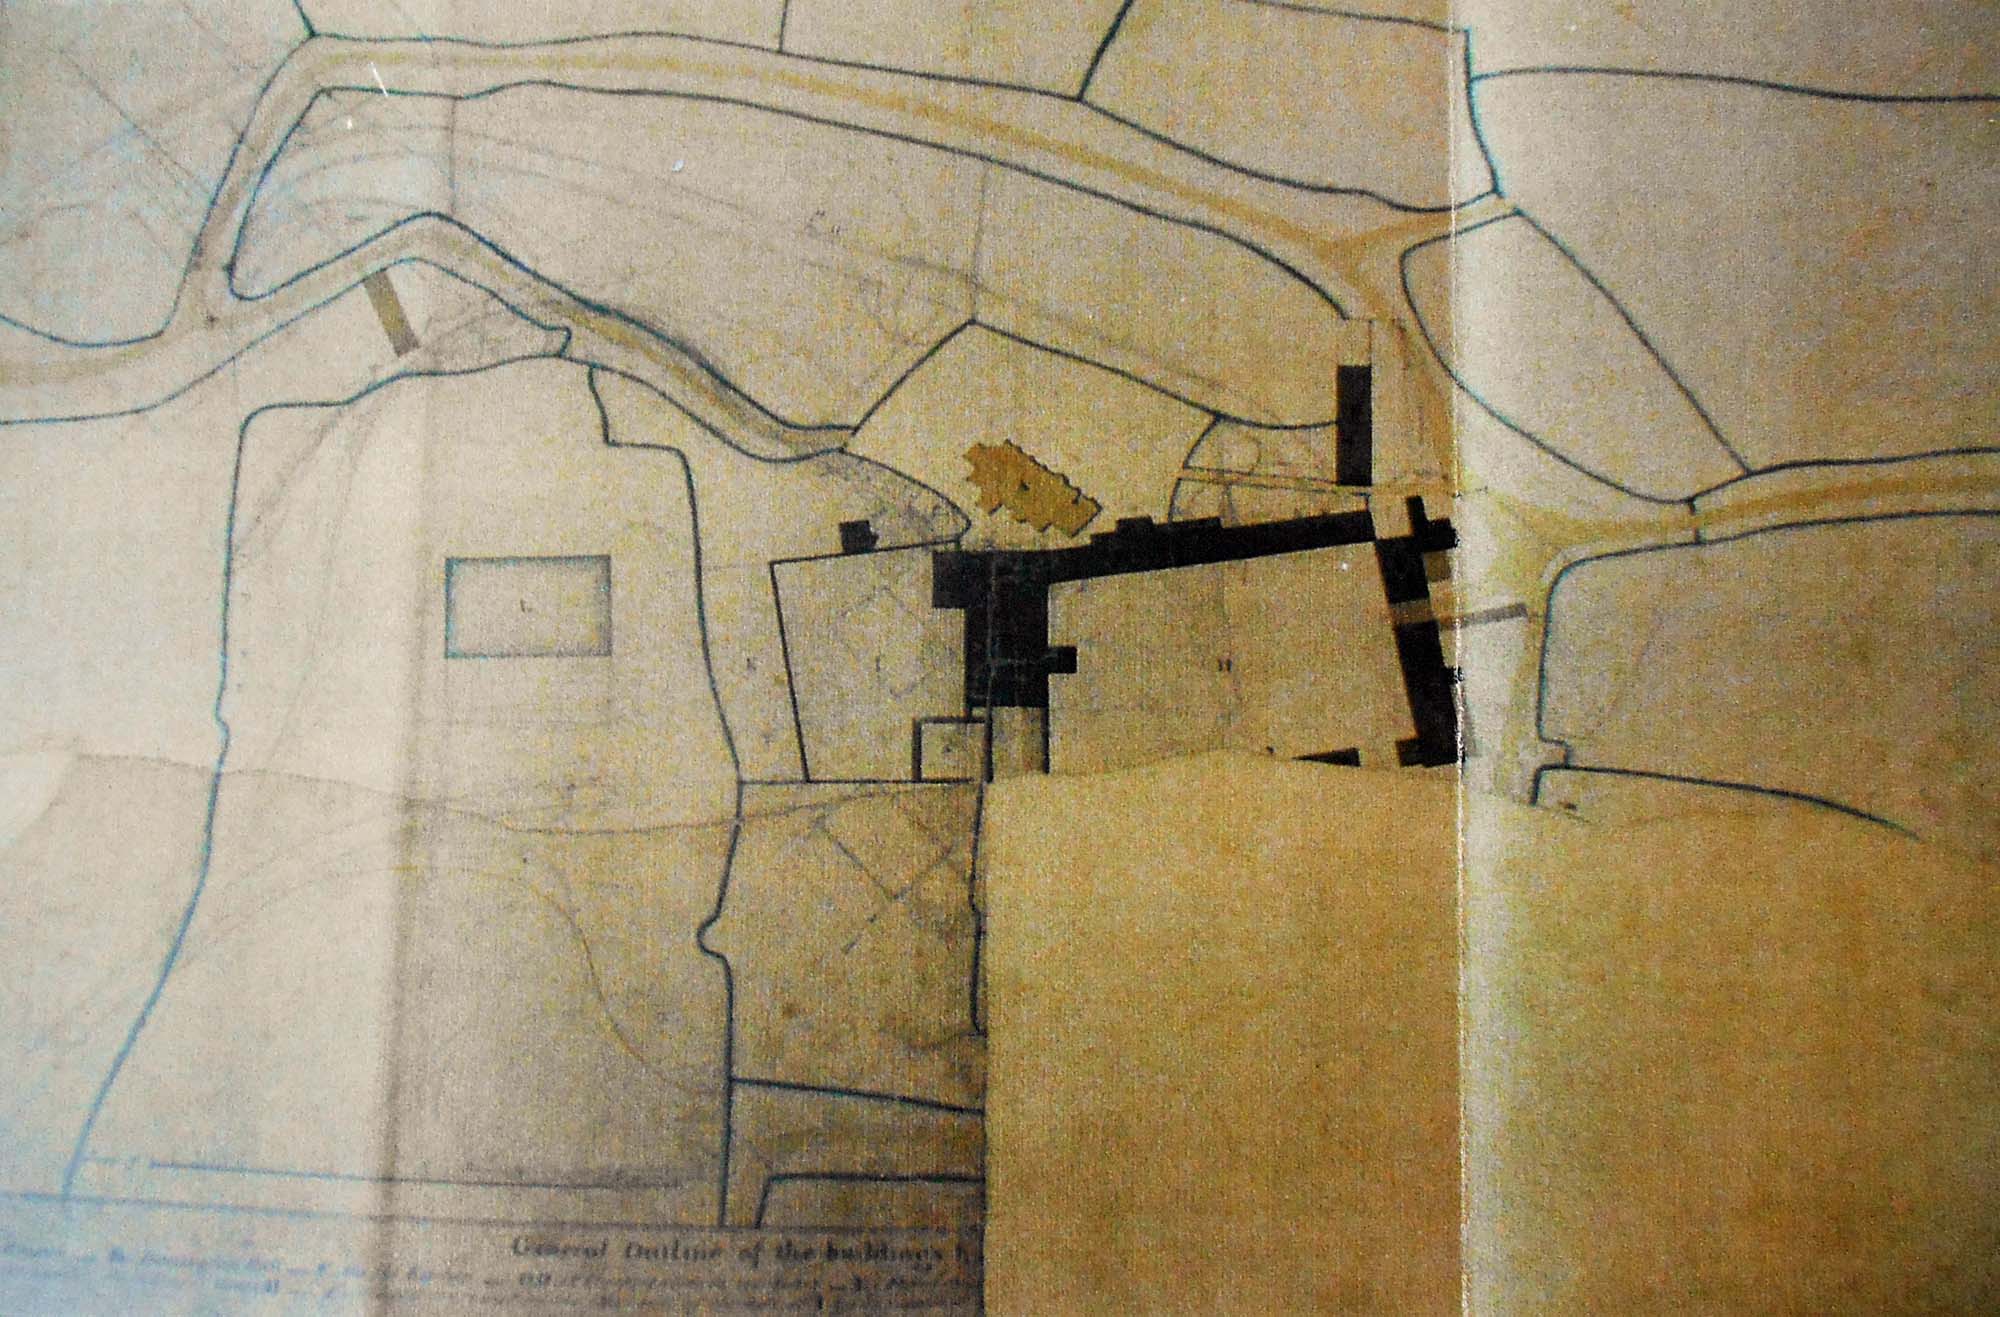  one of George Saunders’ drawings of Dartington Hall Gardens from 1805